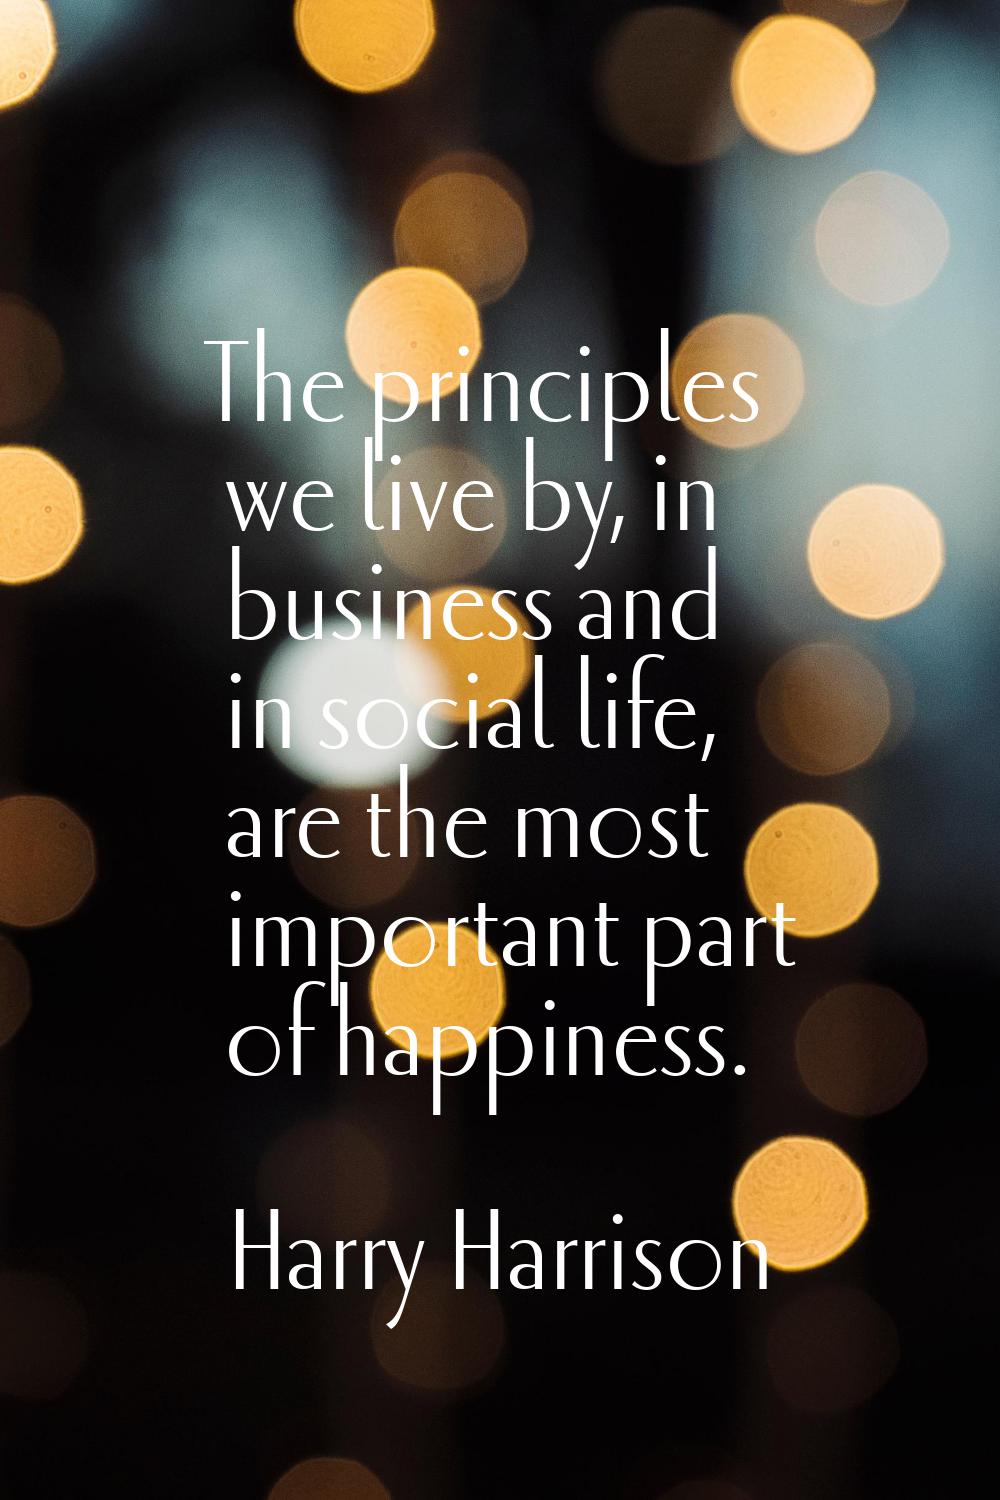 The principles we live by, in business and in social life, are the most important part of happiness